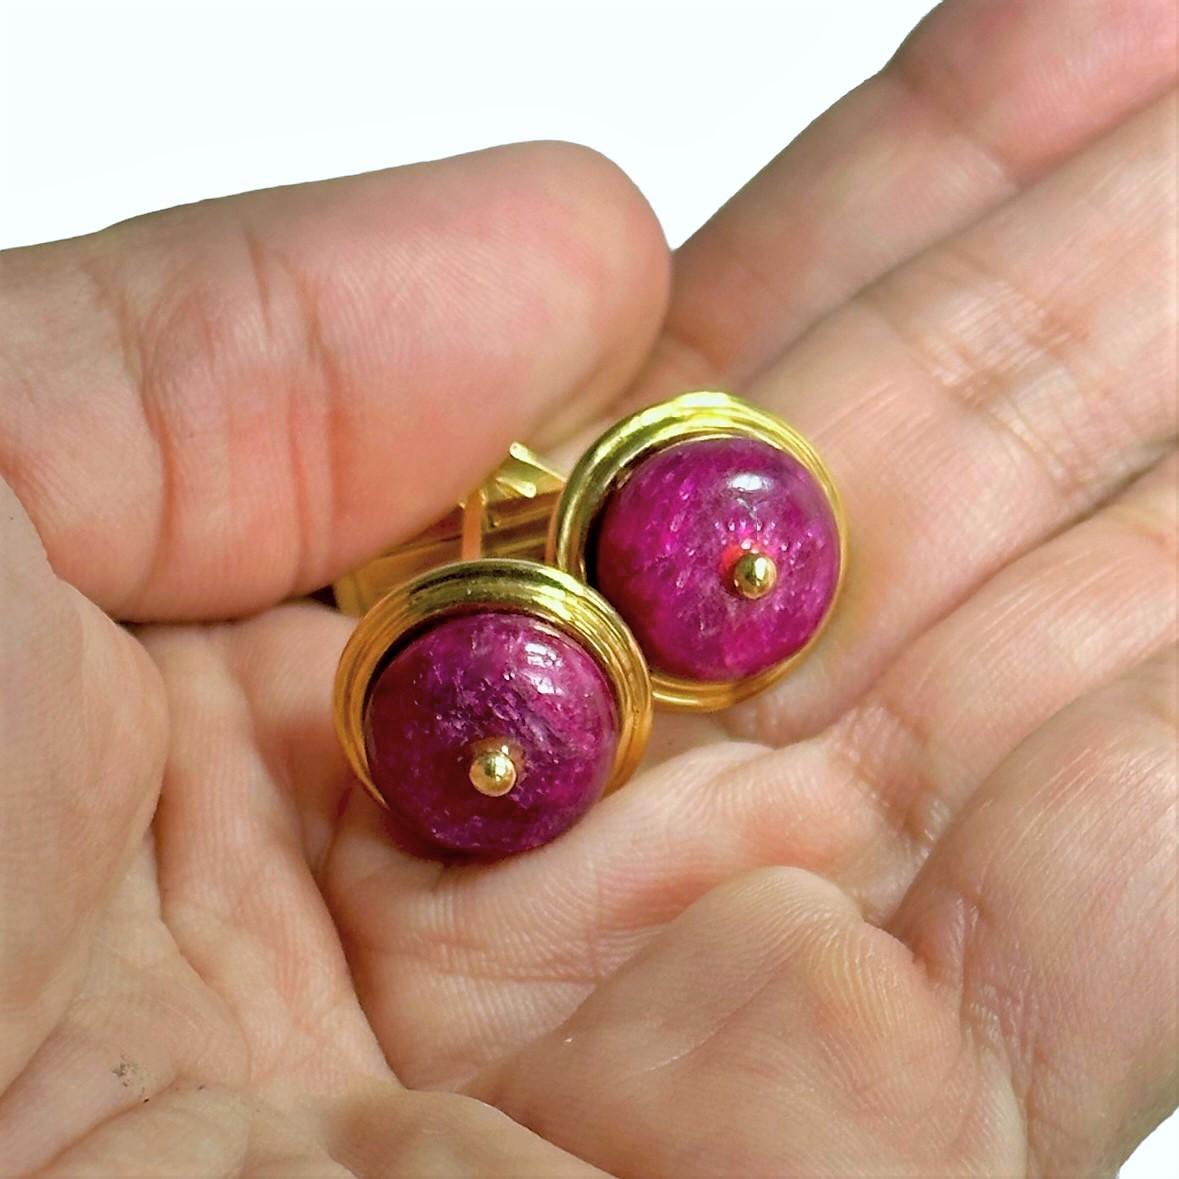 Vintage Emis Beros Gold Cuff Links with Vivid Ruby Bead Centers In Good Condition For Sale In Palm Beach, FL